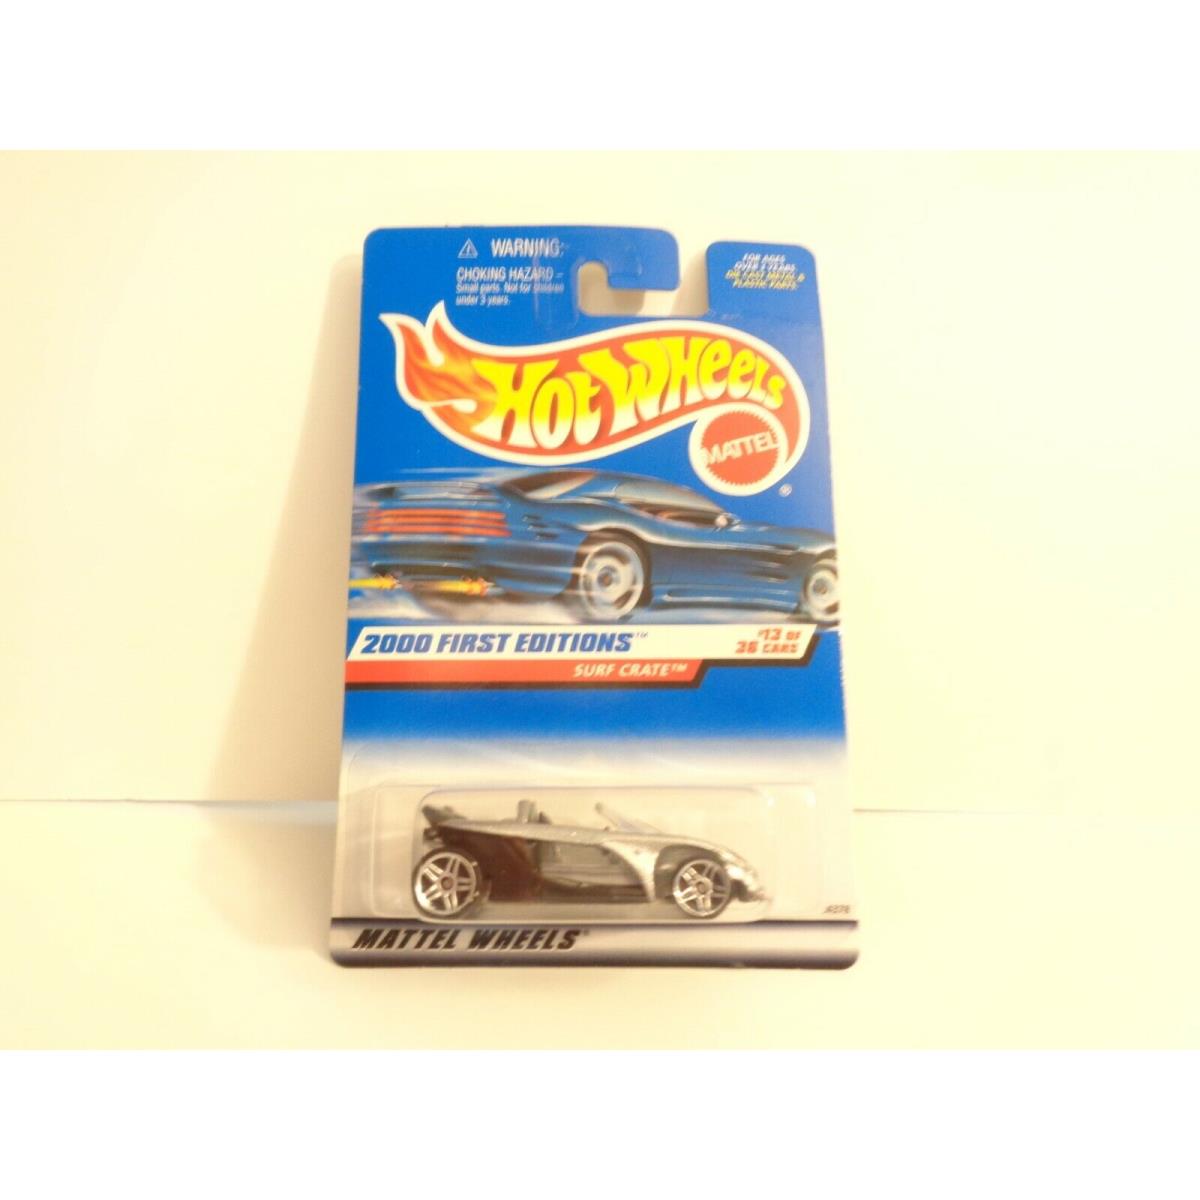 Hot Wheels 2000 First Editions Surf Crate Monmc Scale 1:64 Error Wrong Car